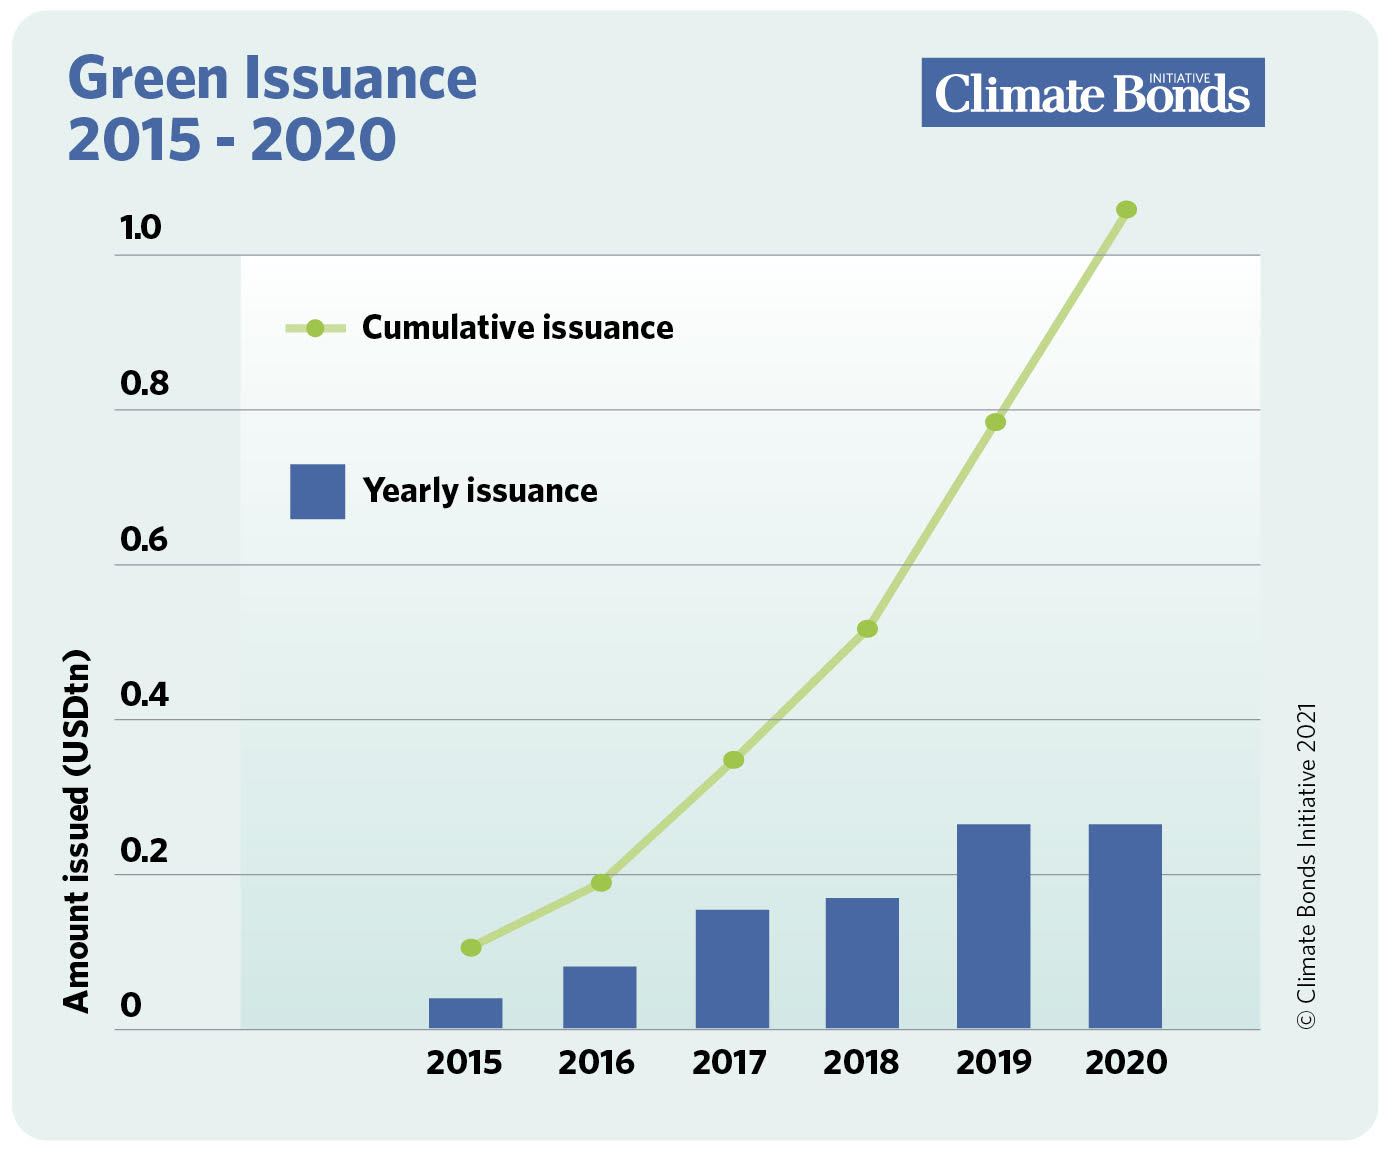 Gelukkig is dat bitter duidelijkheid Record $269.5bn green issuance for 2020: Late surge sees pandemic year pip  2019 total by $3bn | Climate Bonds Initiative